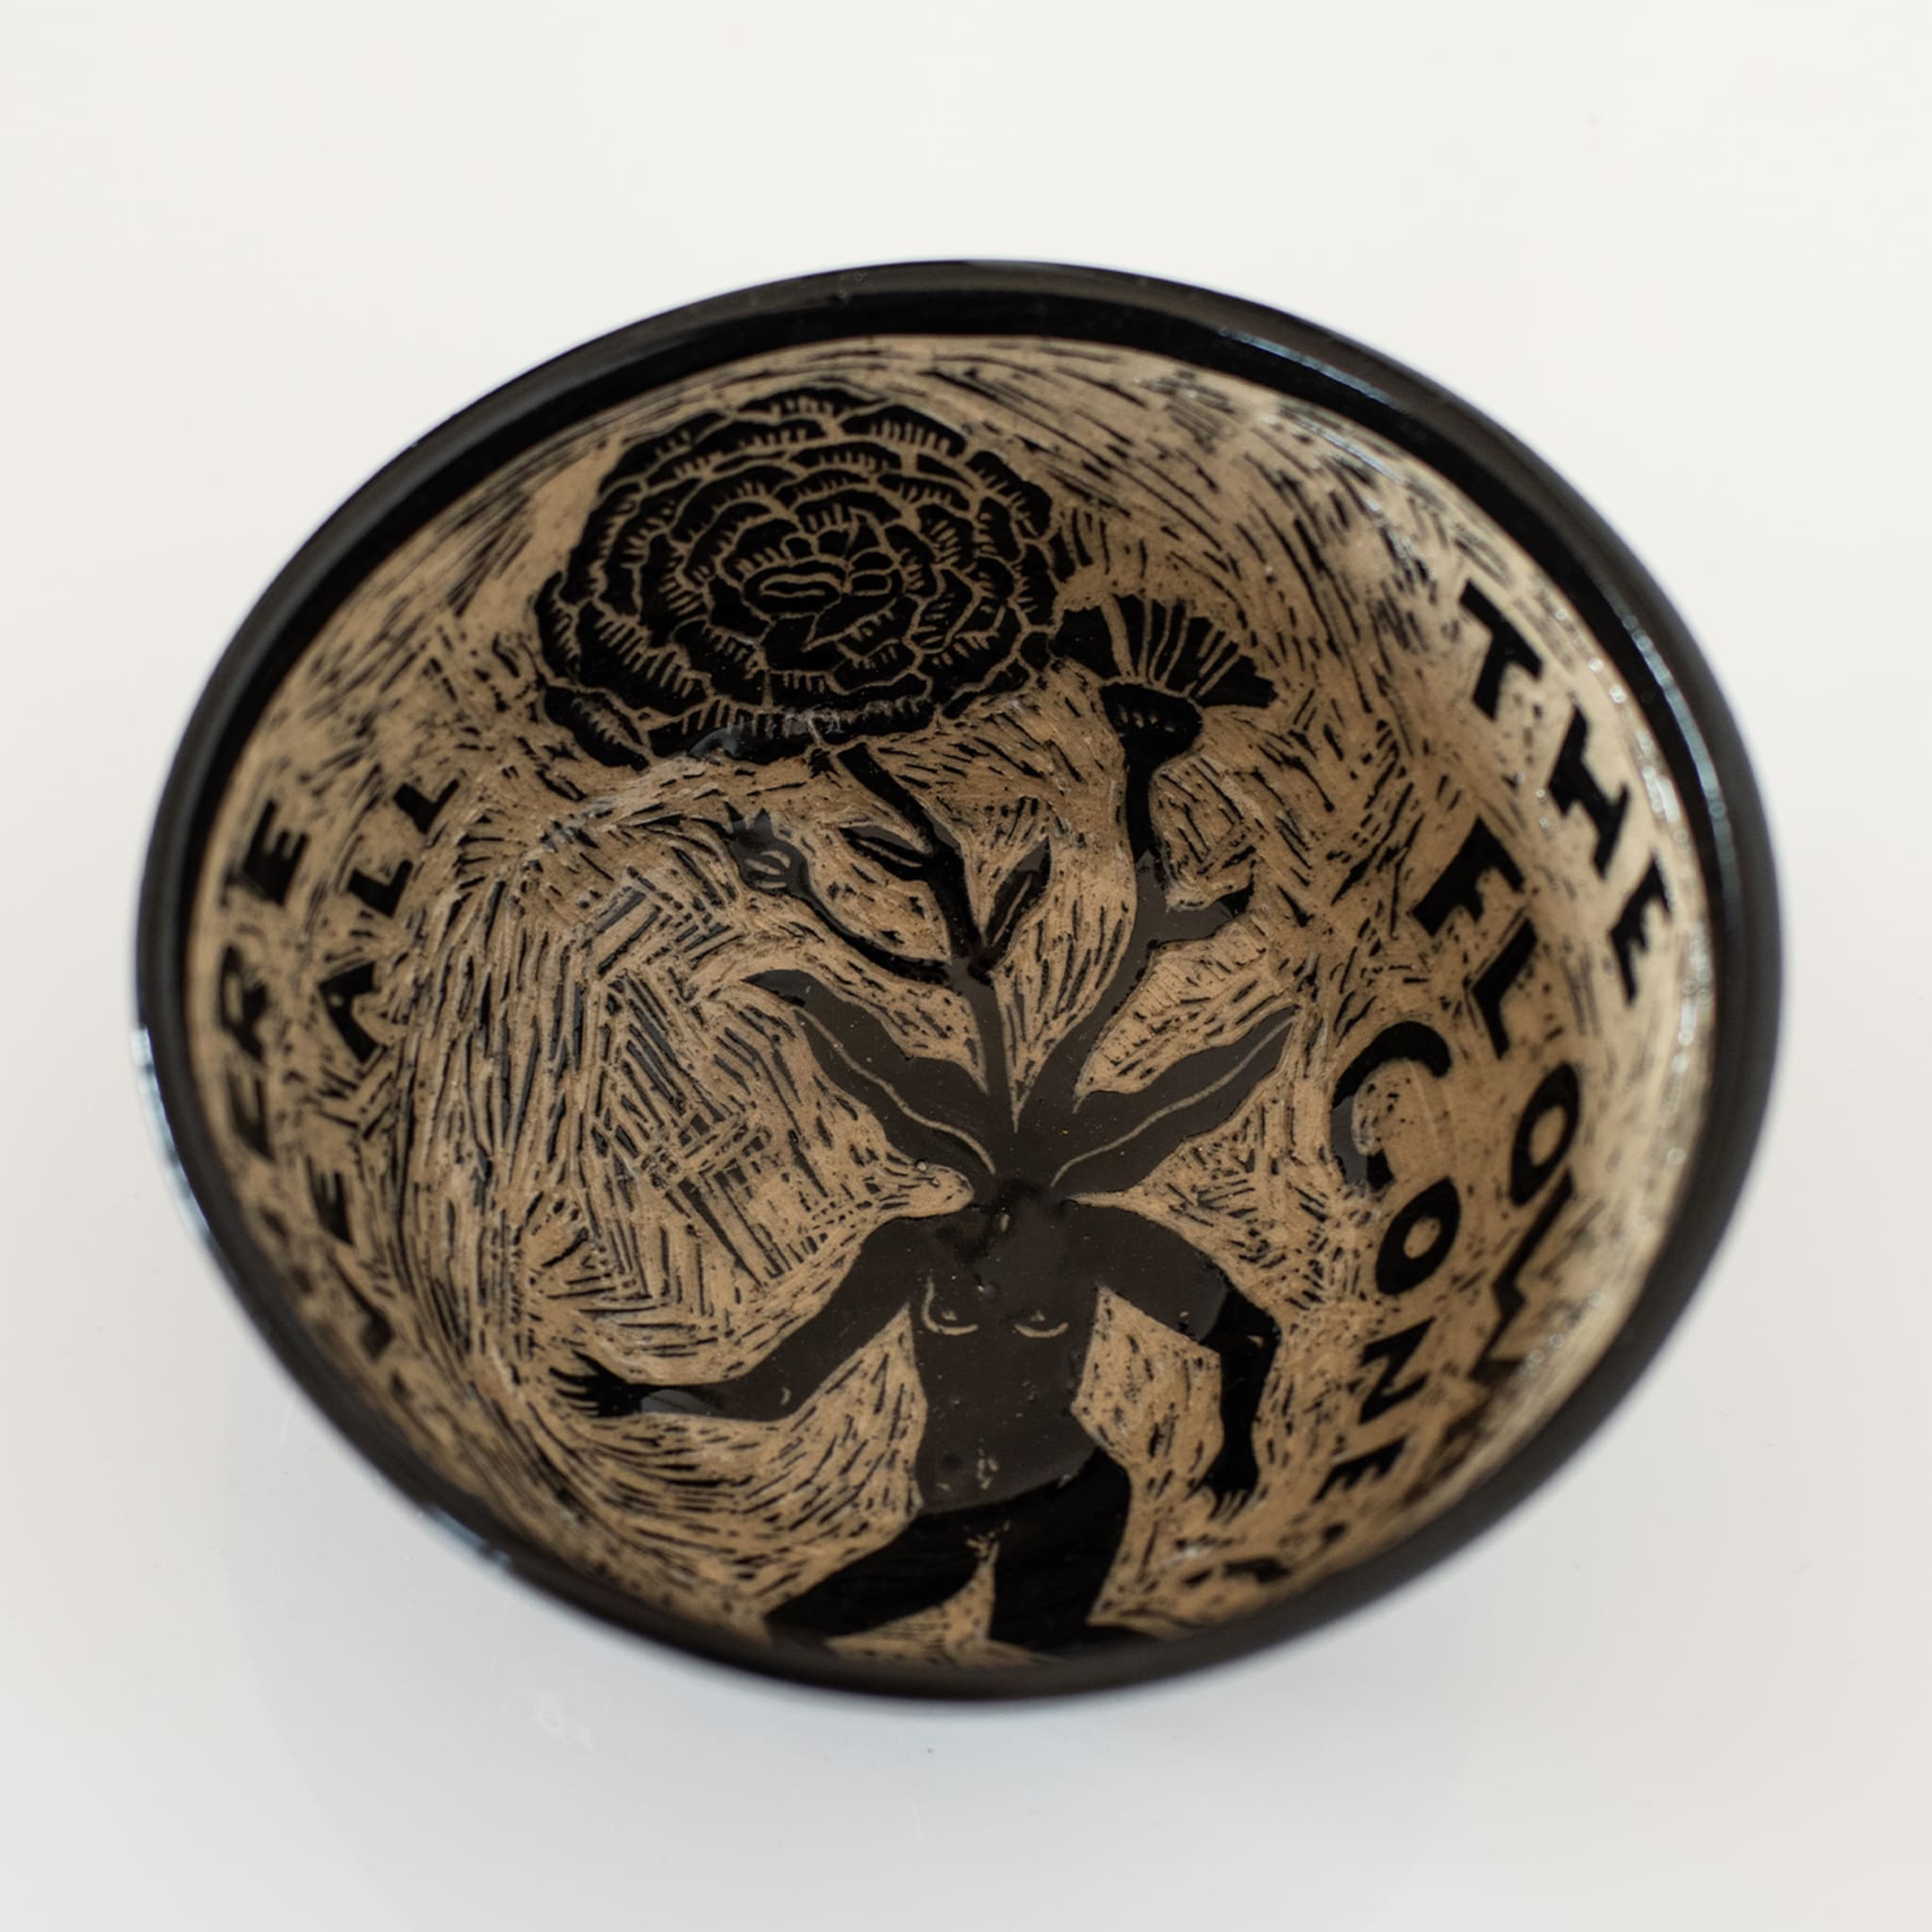 Where Have All the Flowers Gone? Grès Decorative Bowl - Alternative view 2